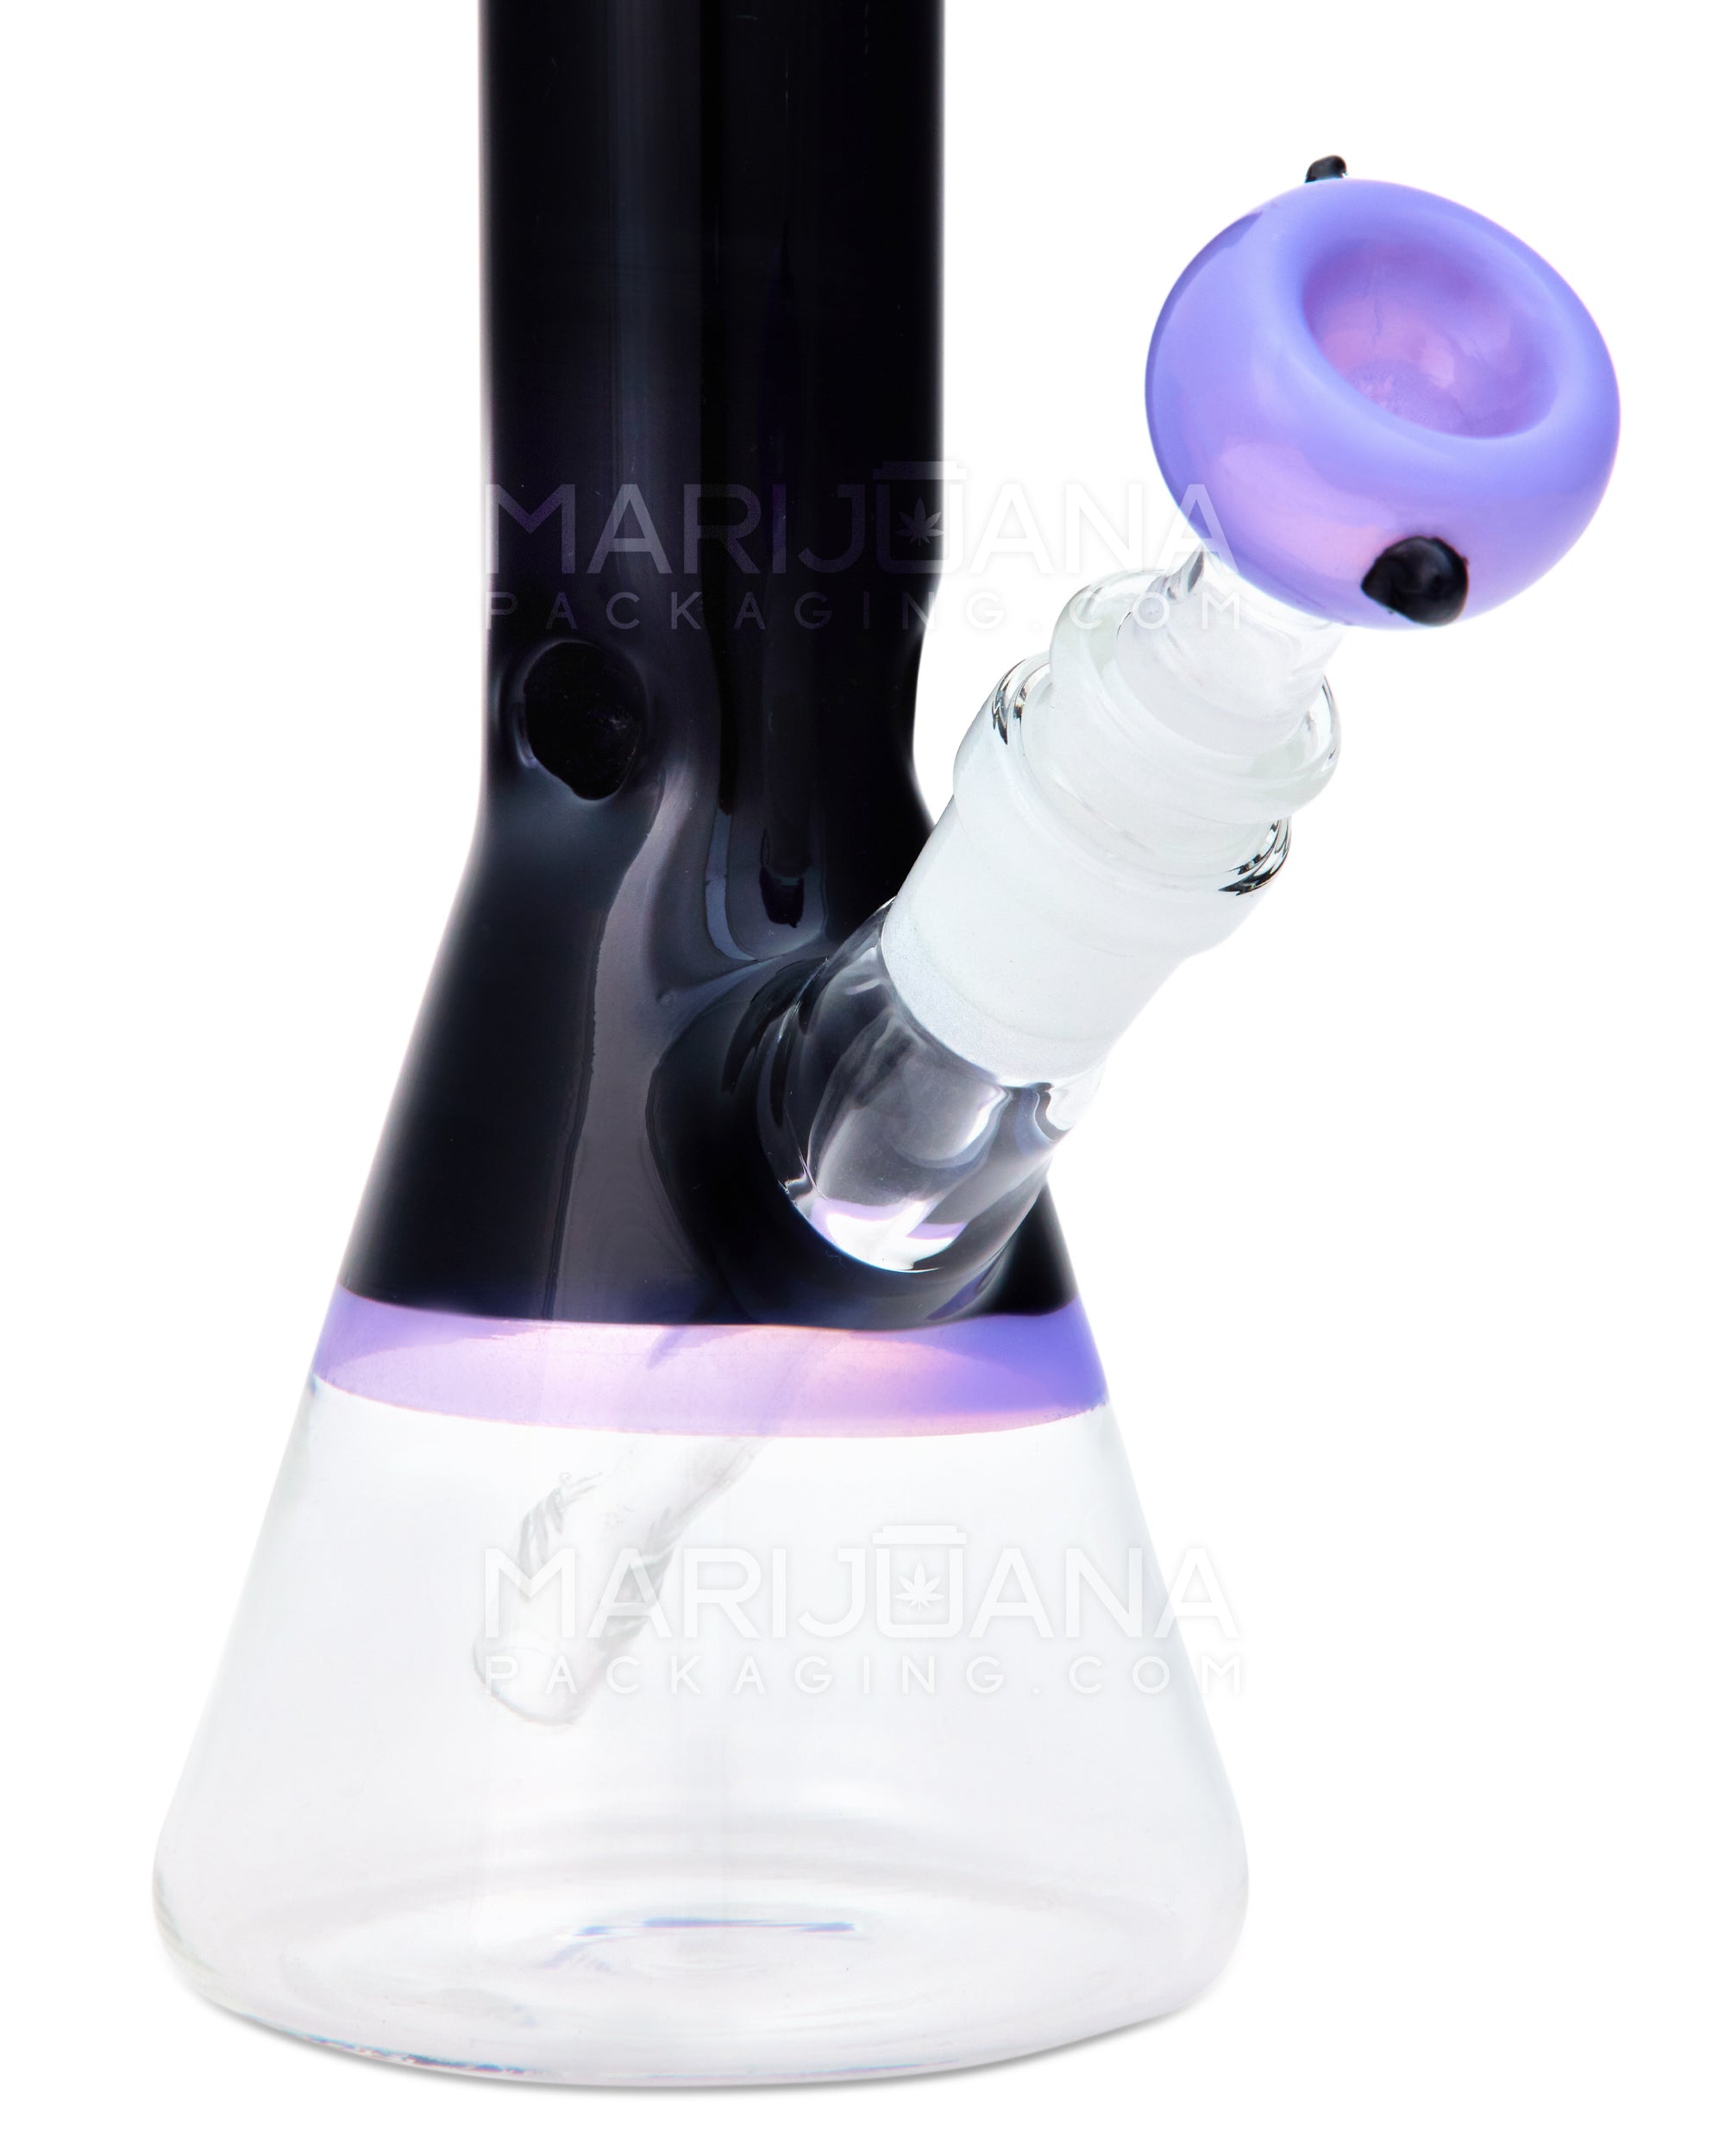 Painted Straight Neck Diffused Downstem Glass Beaker Water Pipe | 10in Tall - 14mm Bowl - Purple & Black - 3